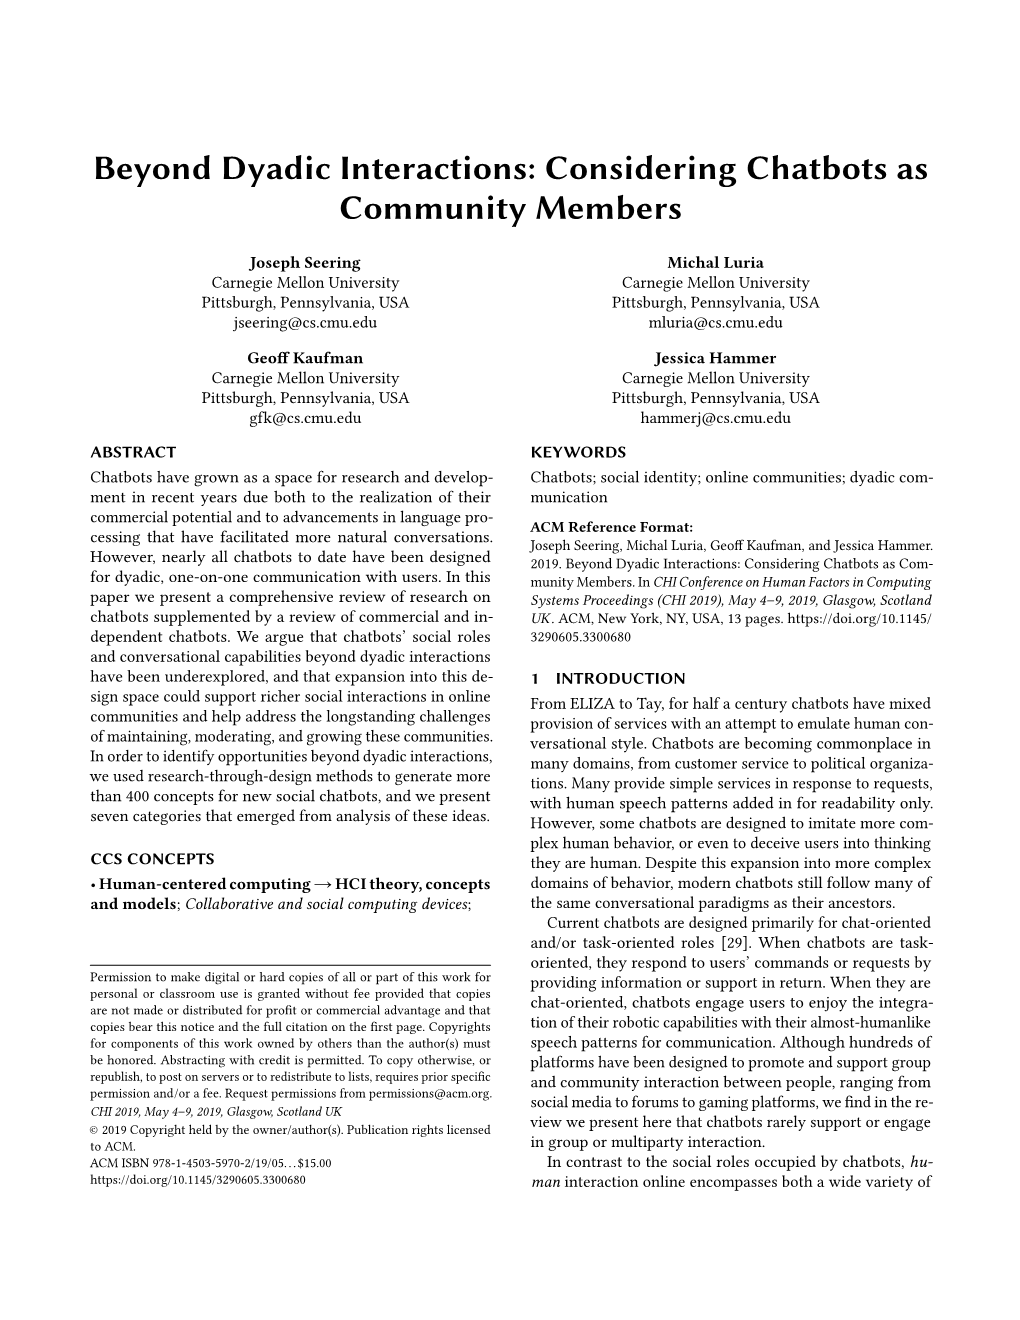 Beyond Dyadic Interactions: Considering Chatbots As Community Members